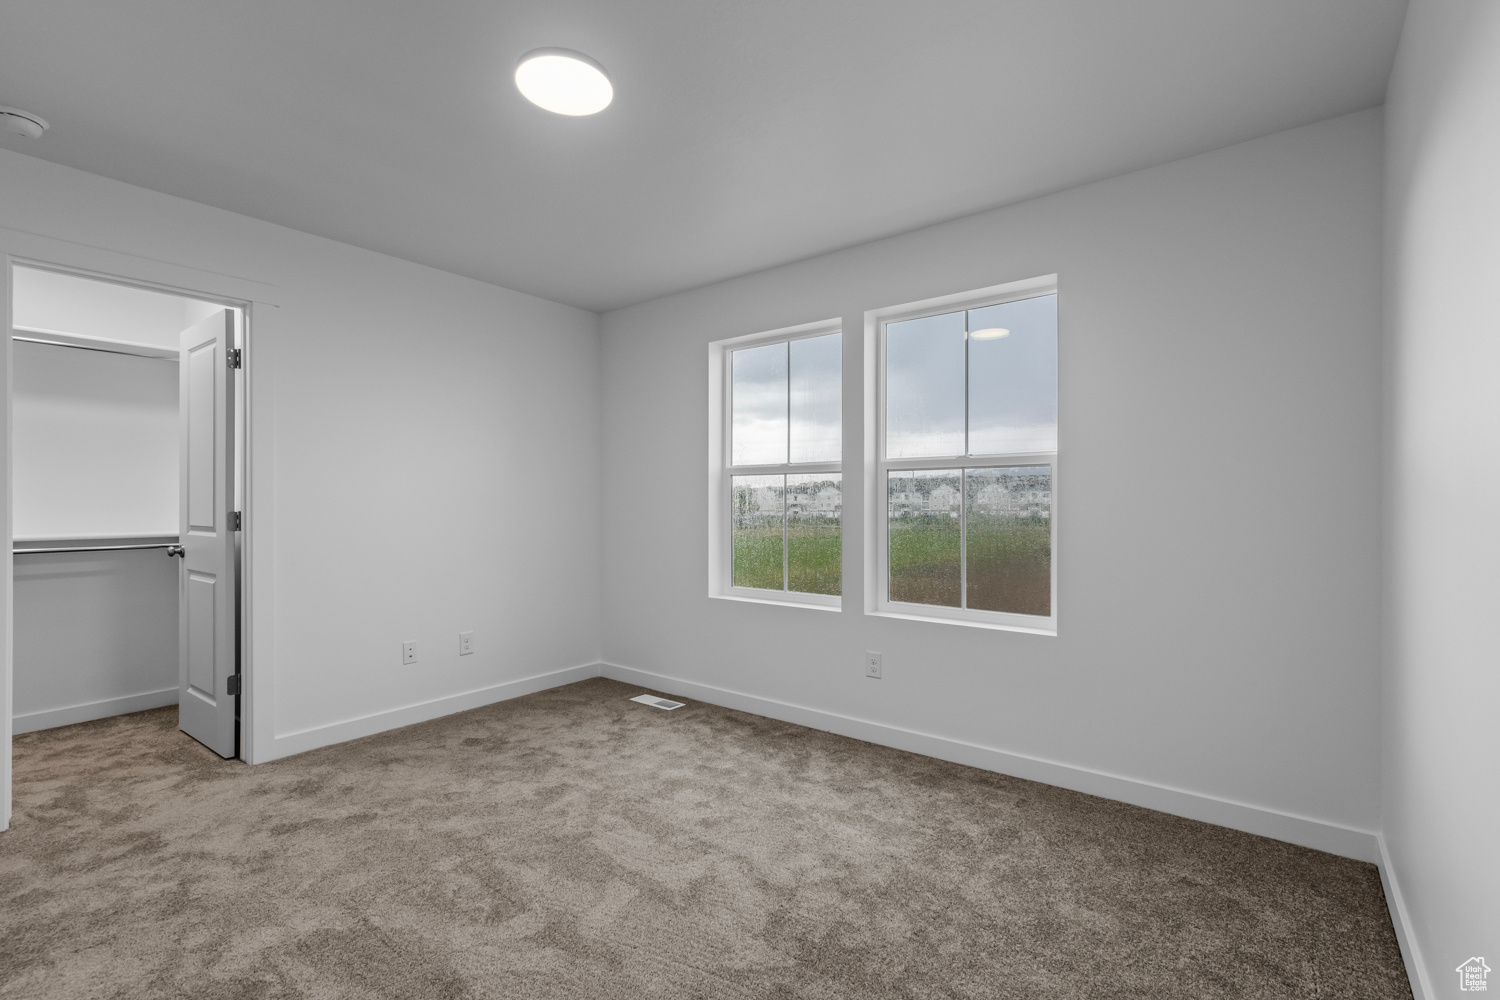 Unfurnished bedroom featuring carpet and a spacious closet